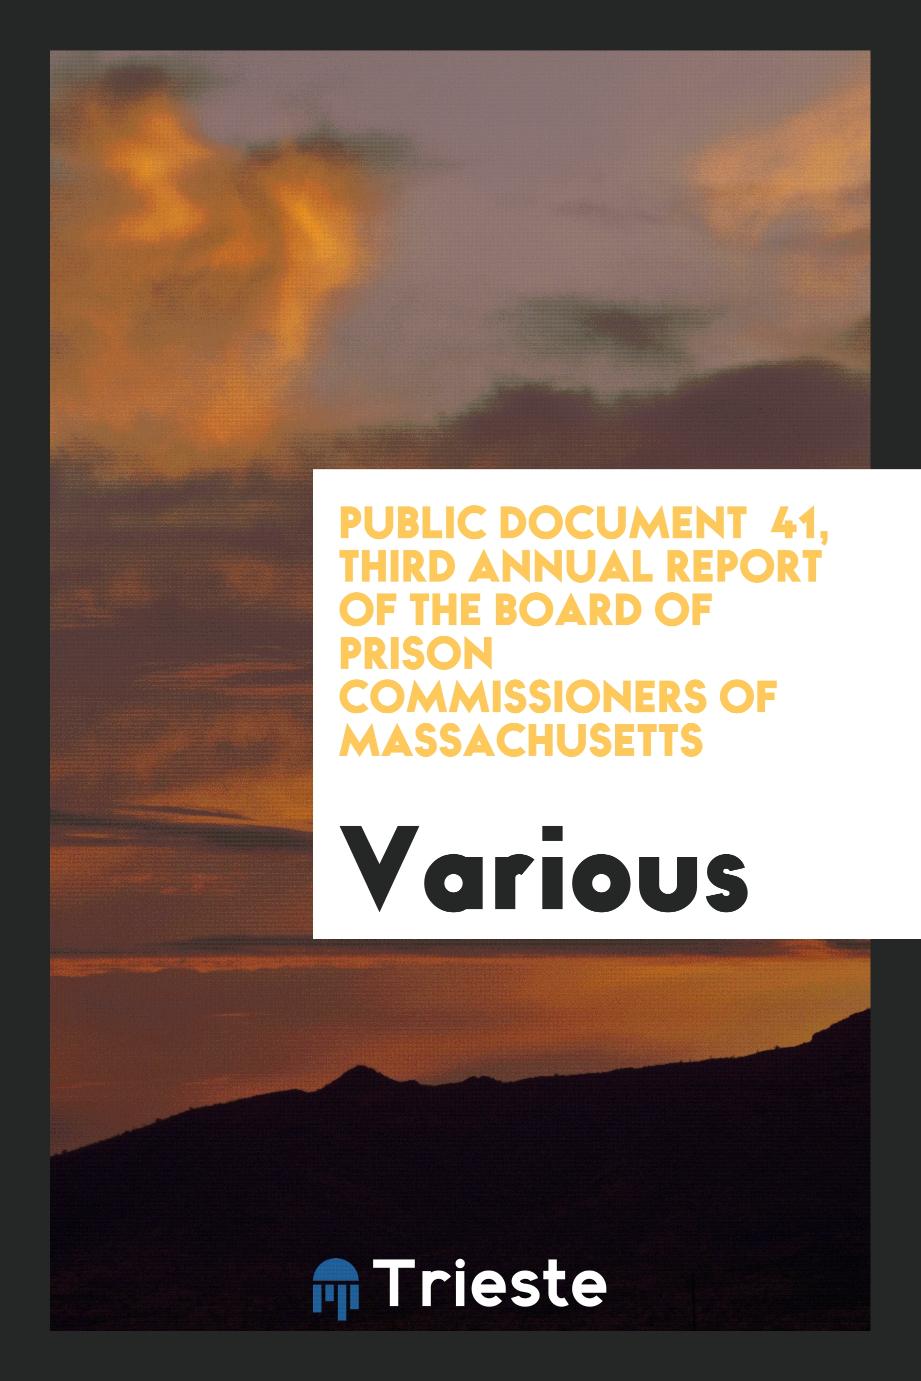 Public Document № 41, Third Annual Report of the Board of Prison Commissioners of Massachusetts